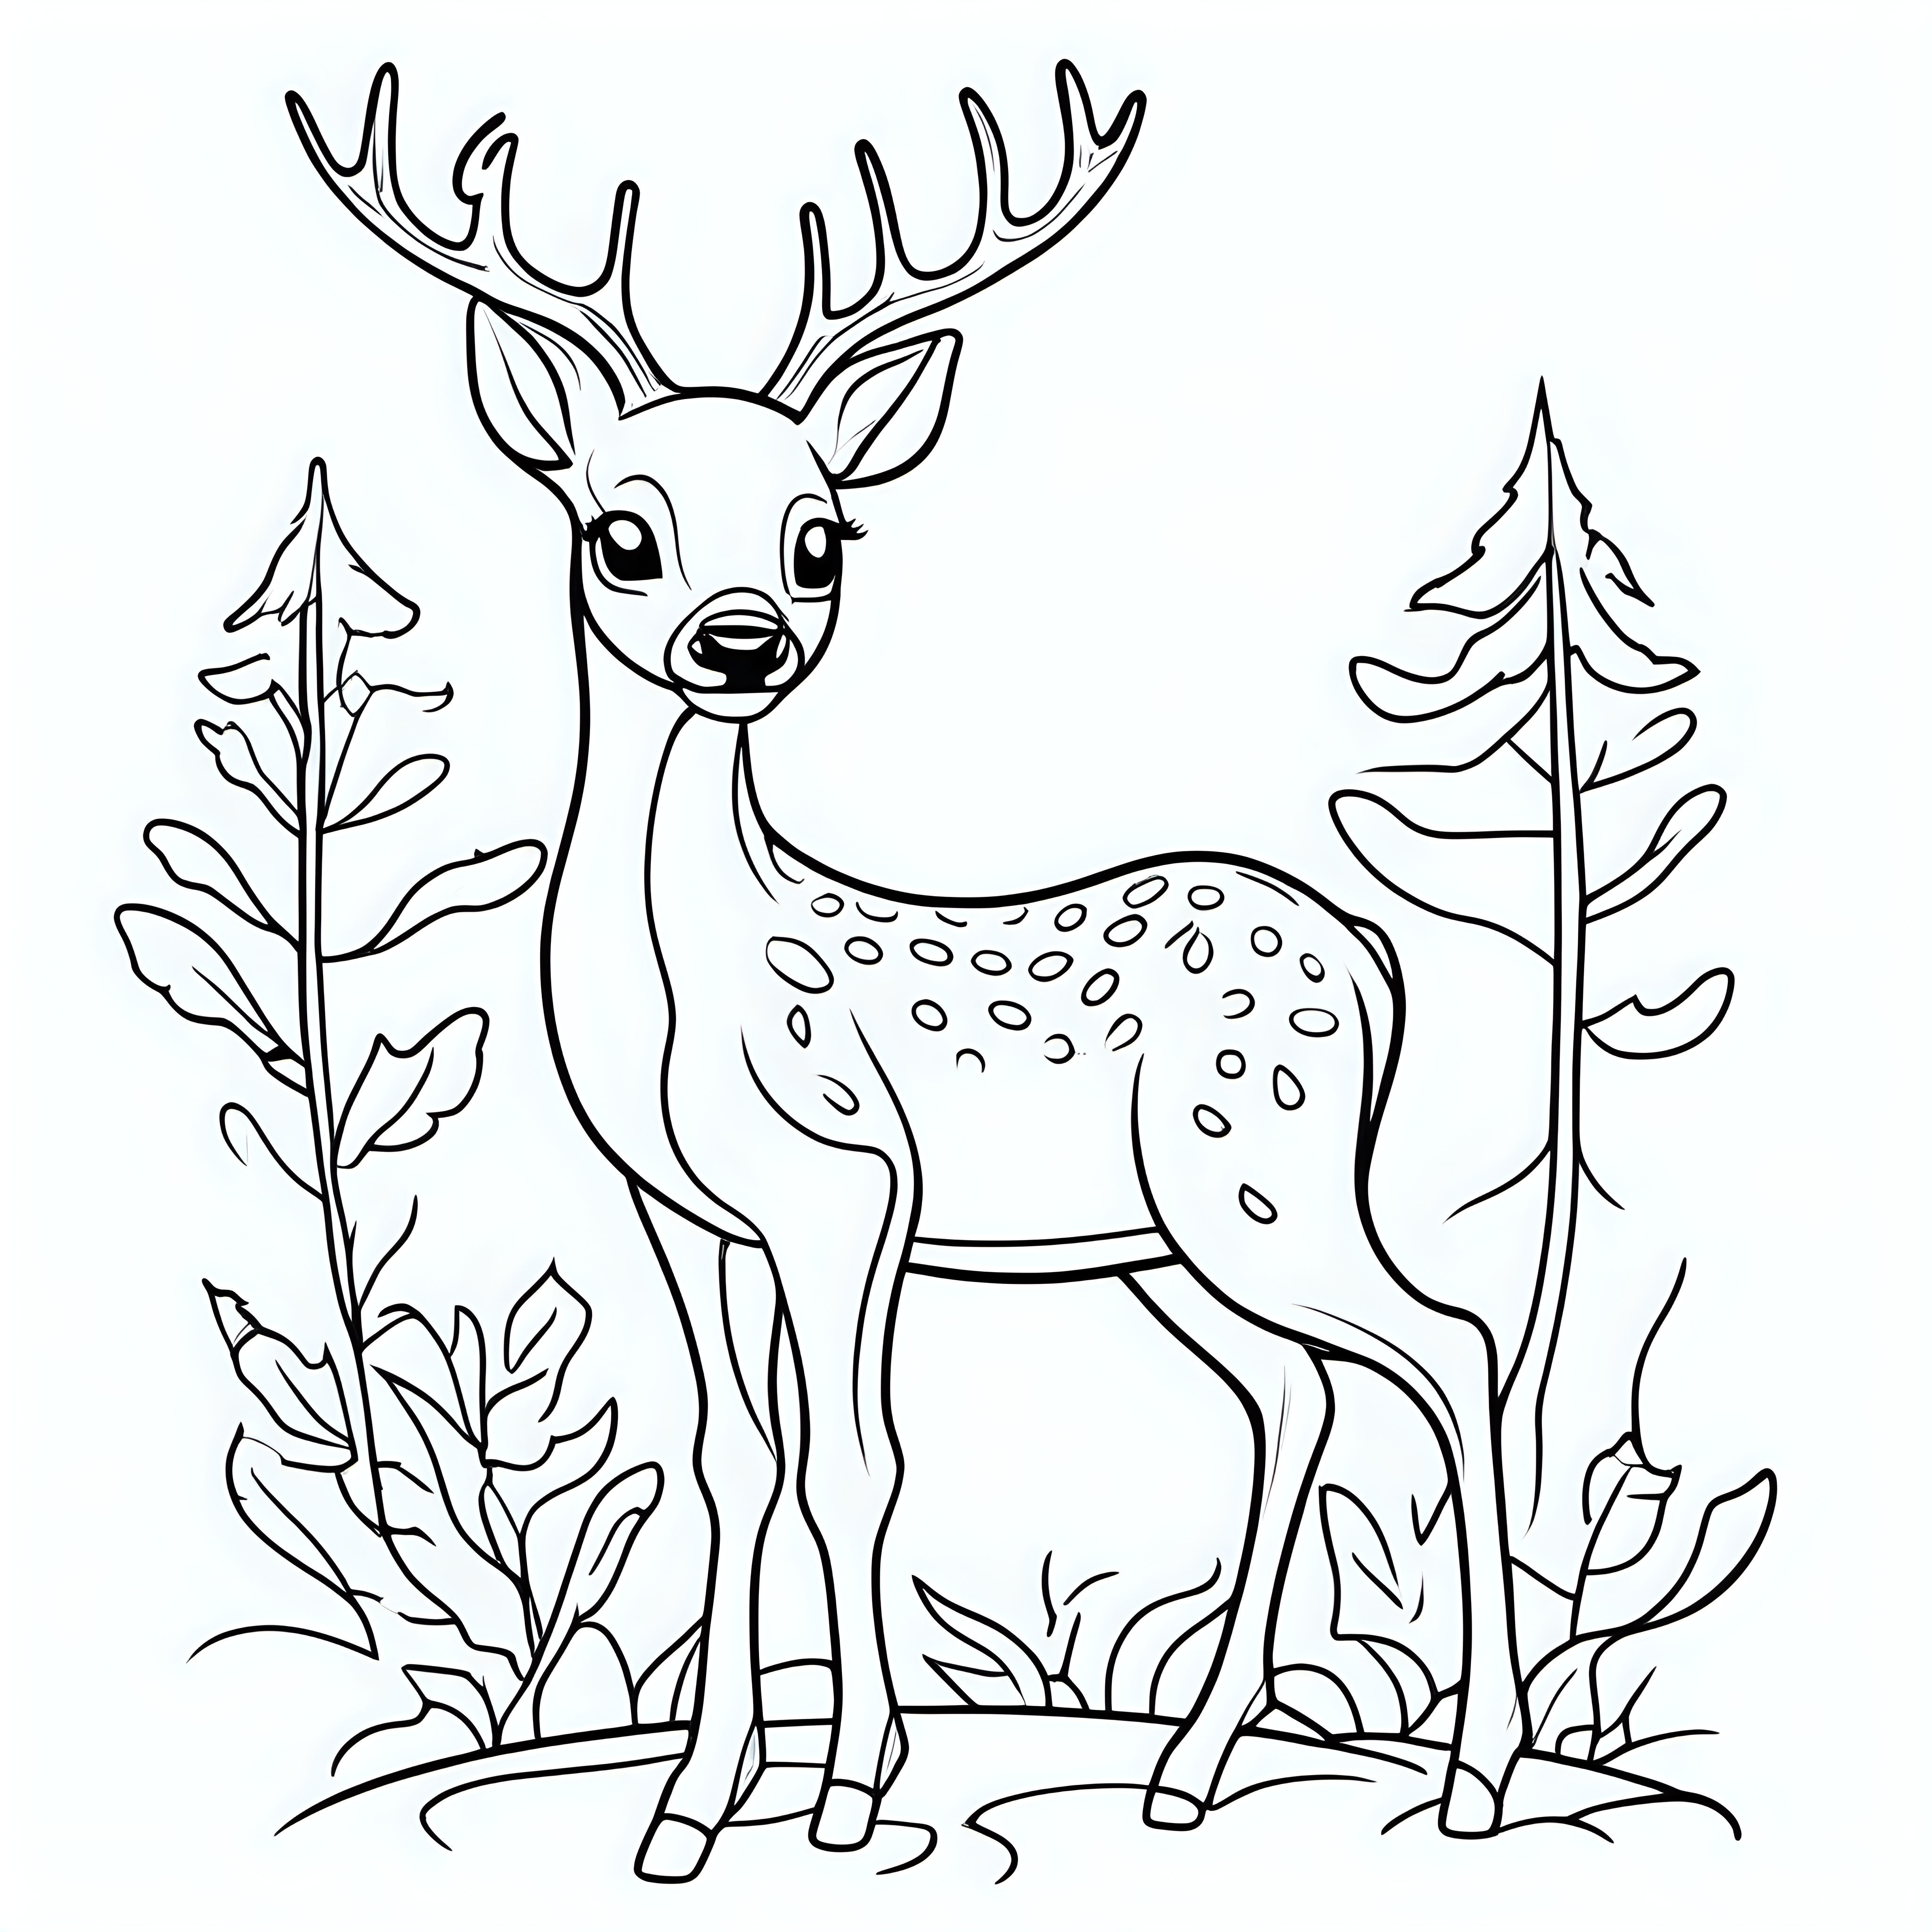 draw a cute deer with only the outline